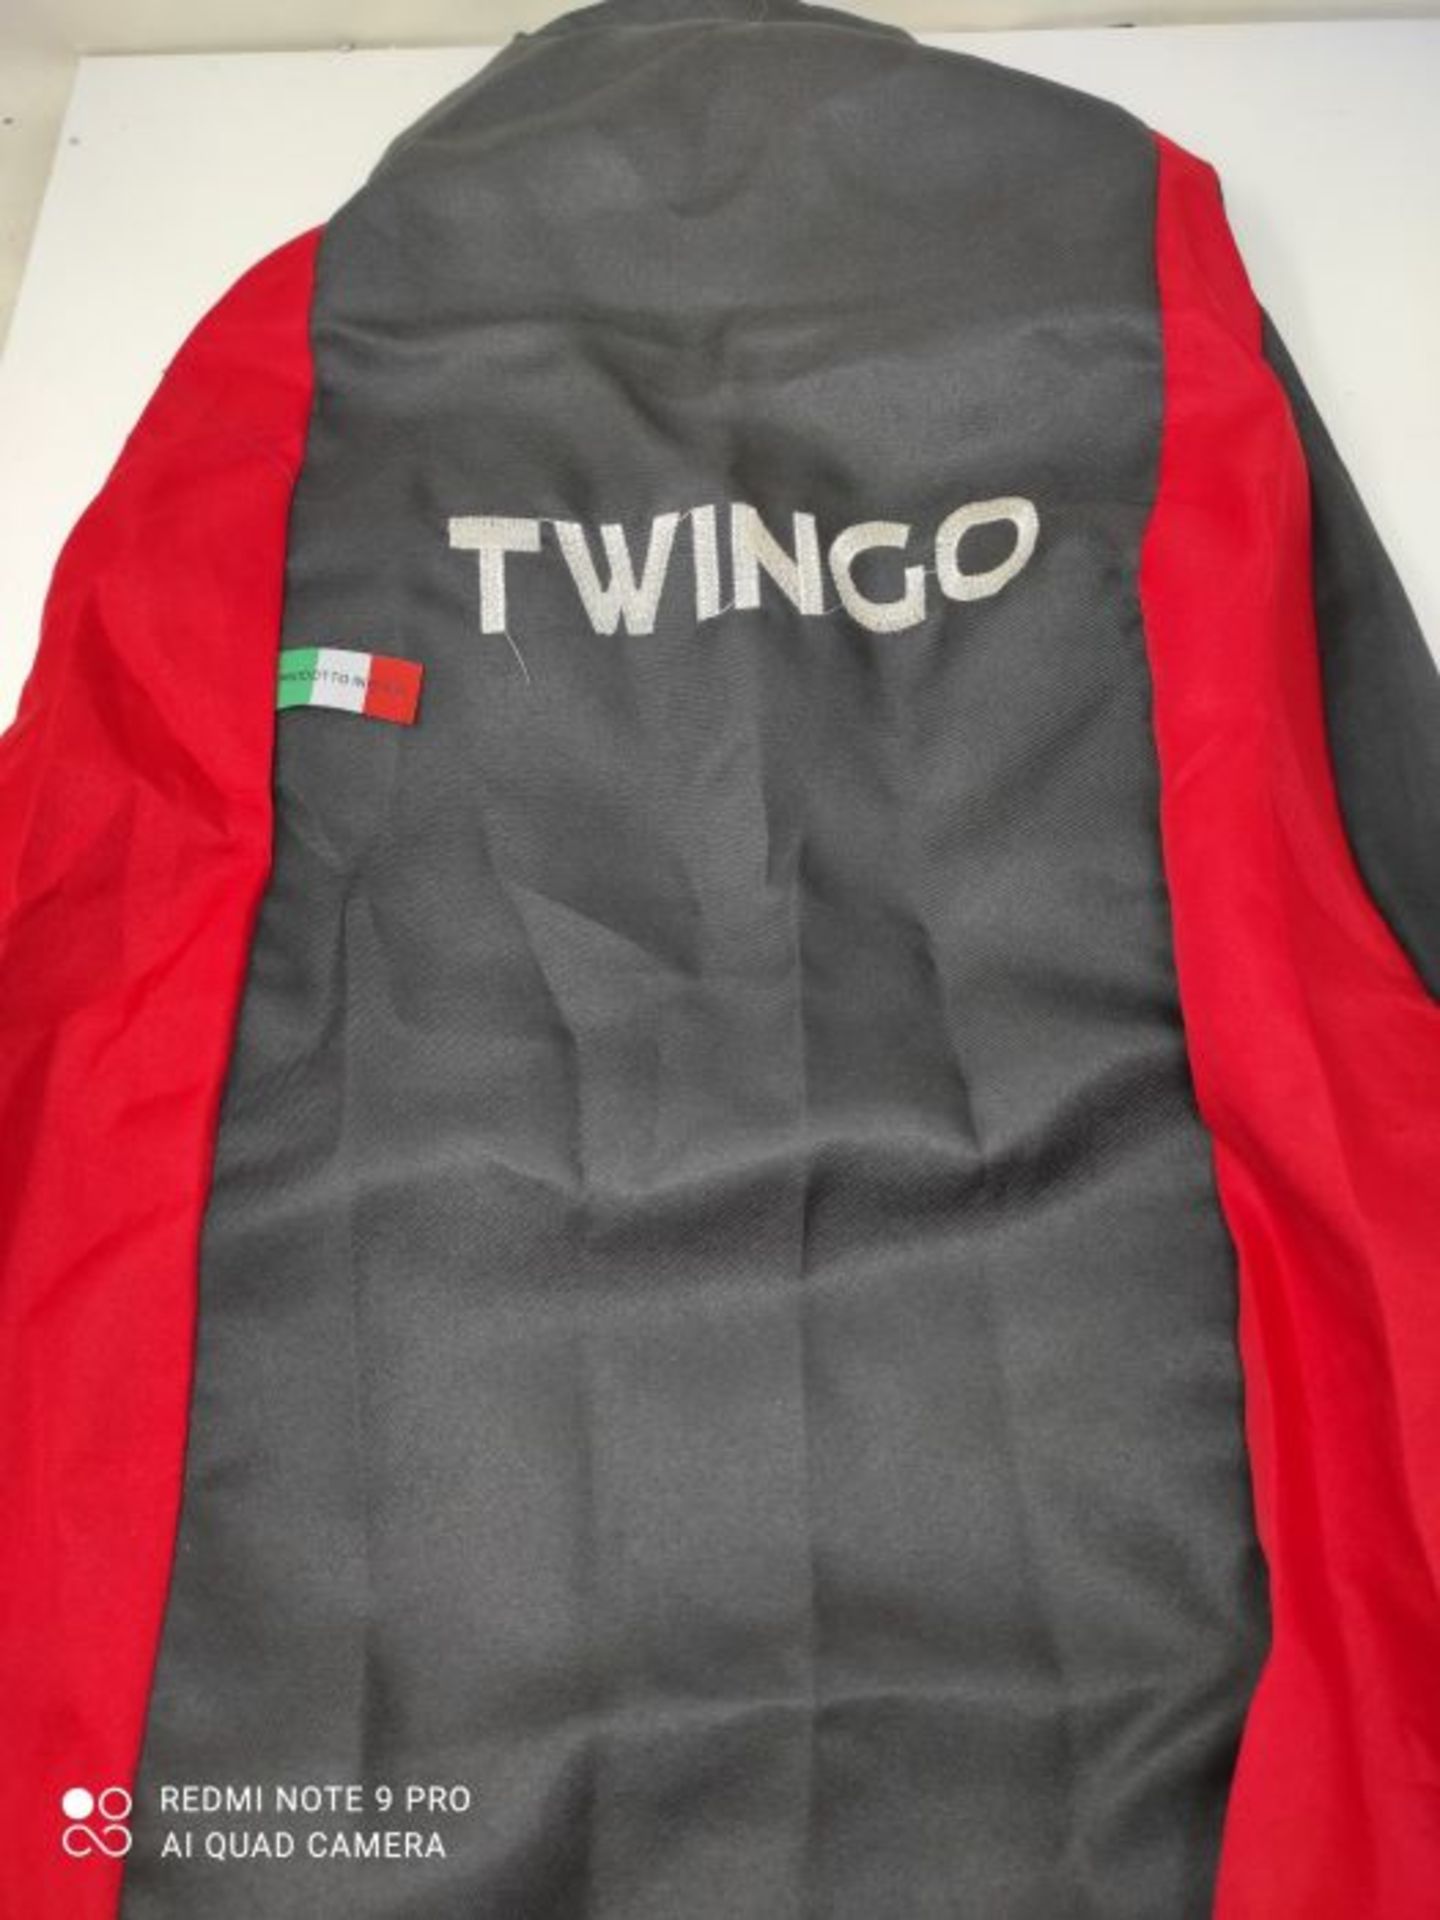 Lupex Shop Twingo N.R Seat Covers Black/Red - Image 2 of 3